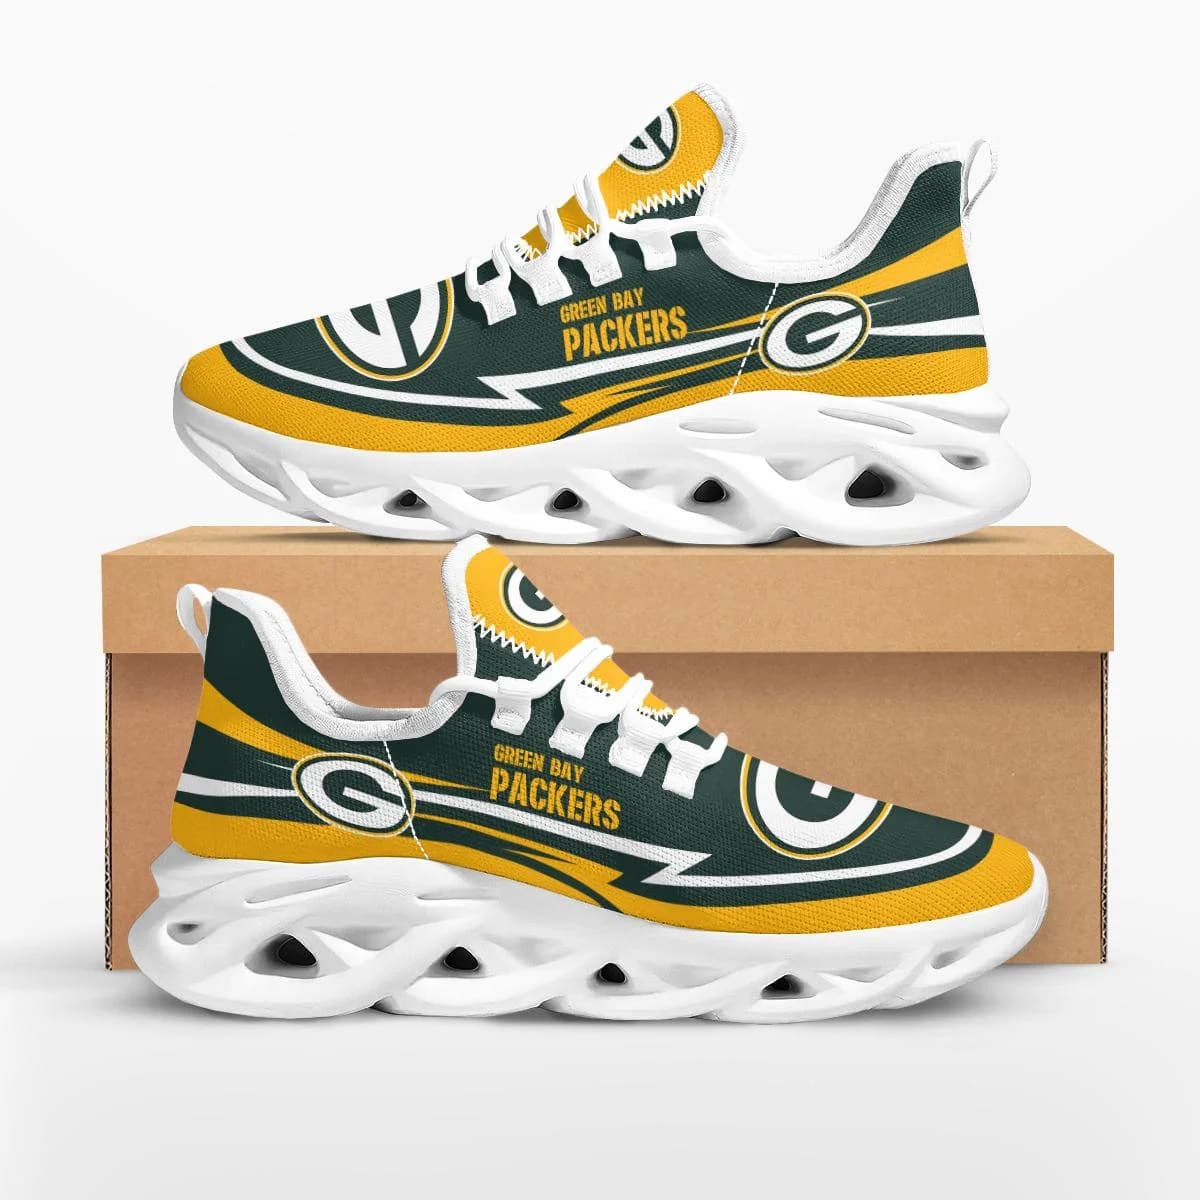 NFL Green Bay Packers Are Coming Curves Max Soul Shoes Ar62xh.jpg